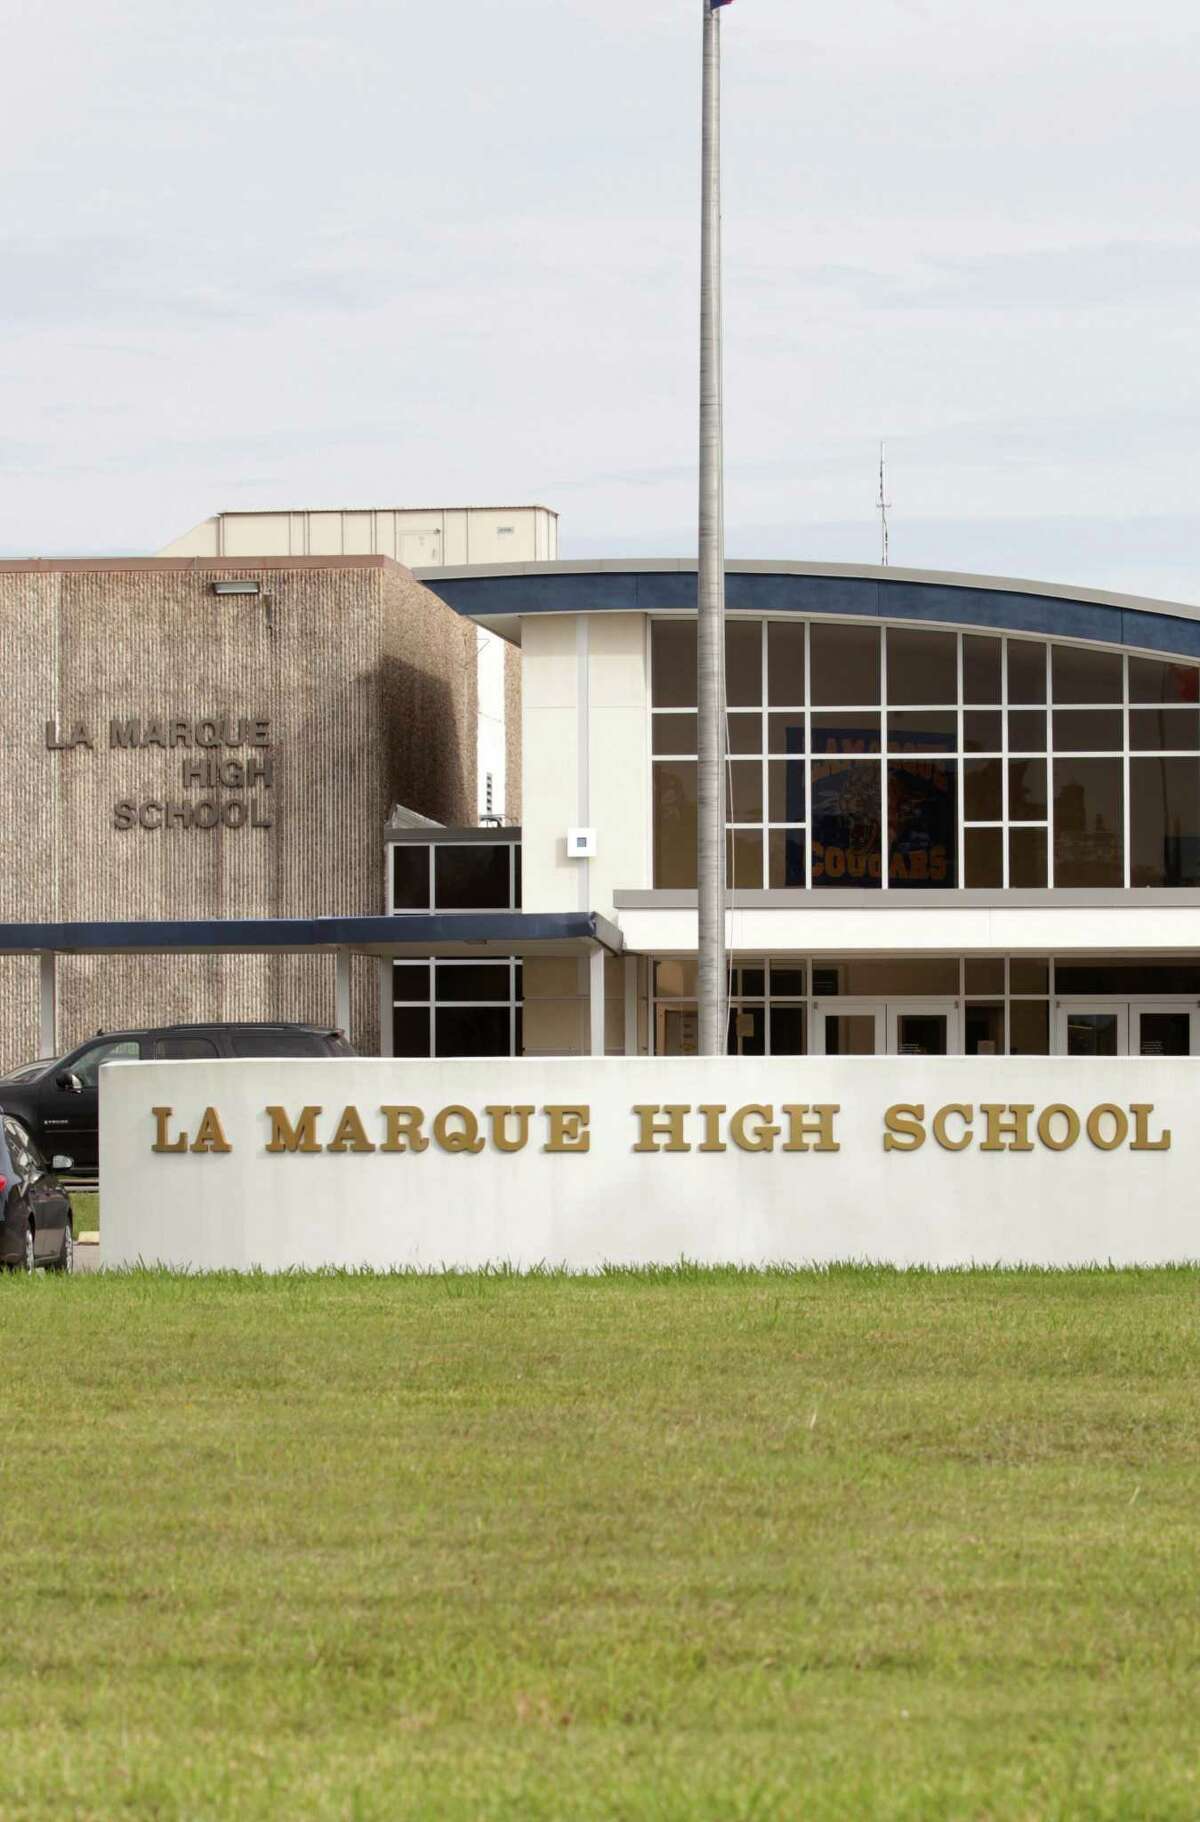 Students leave La Marque High School in the afternoon, Friday, Nov. 13, 2015, in La Marque. The school district will be shut down at the end of the school year.